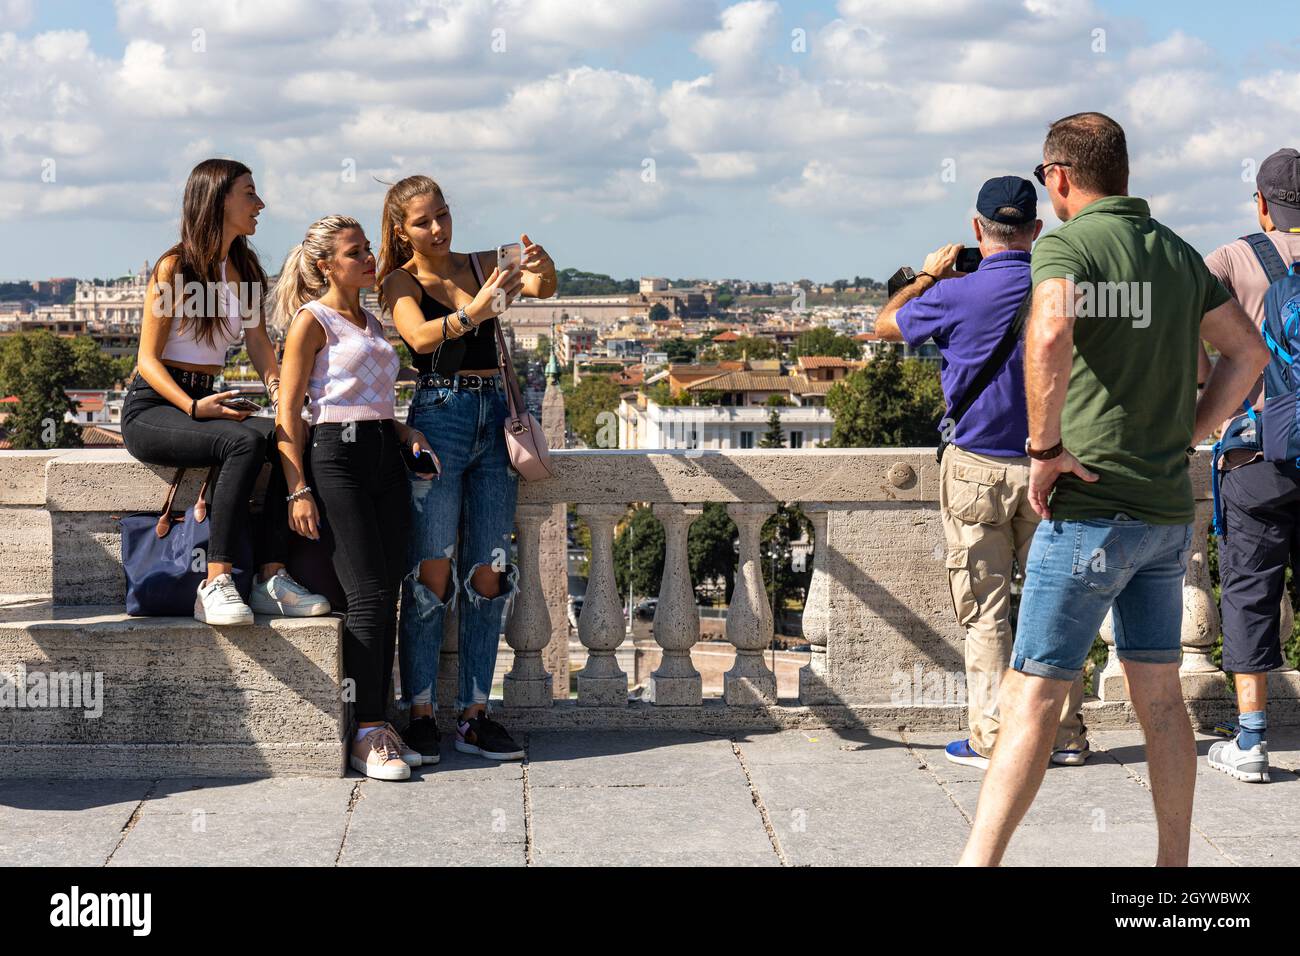 Young women or teenage girls taking a group selfie on Terrazza del Pincio in Rome, Italy Stock Photo